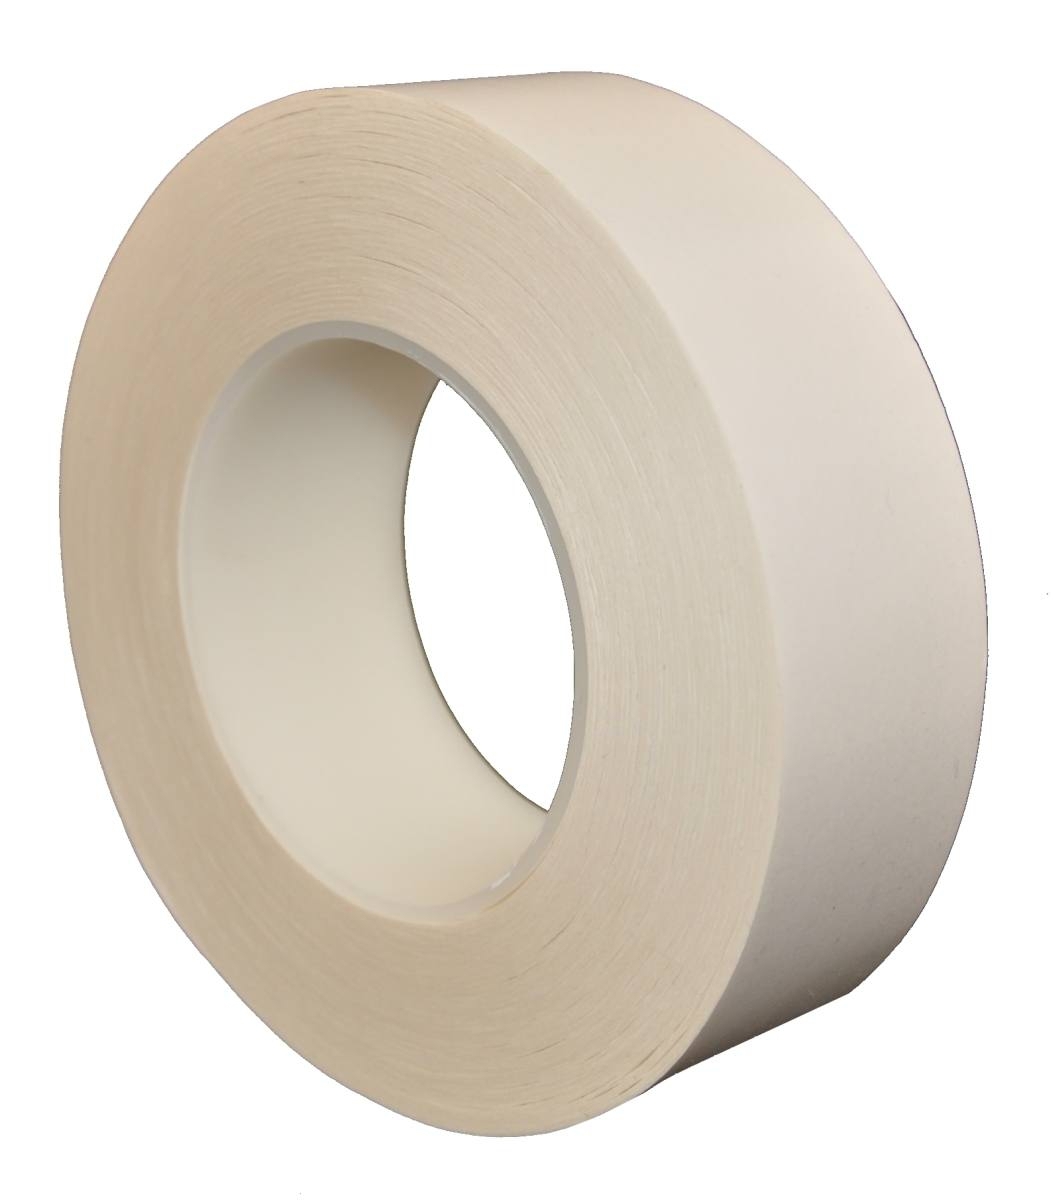 SKS silicone paper release liner, 100mmx150m, coated with glassine on both sides, white